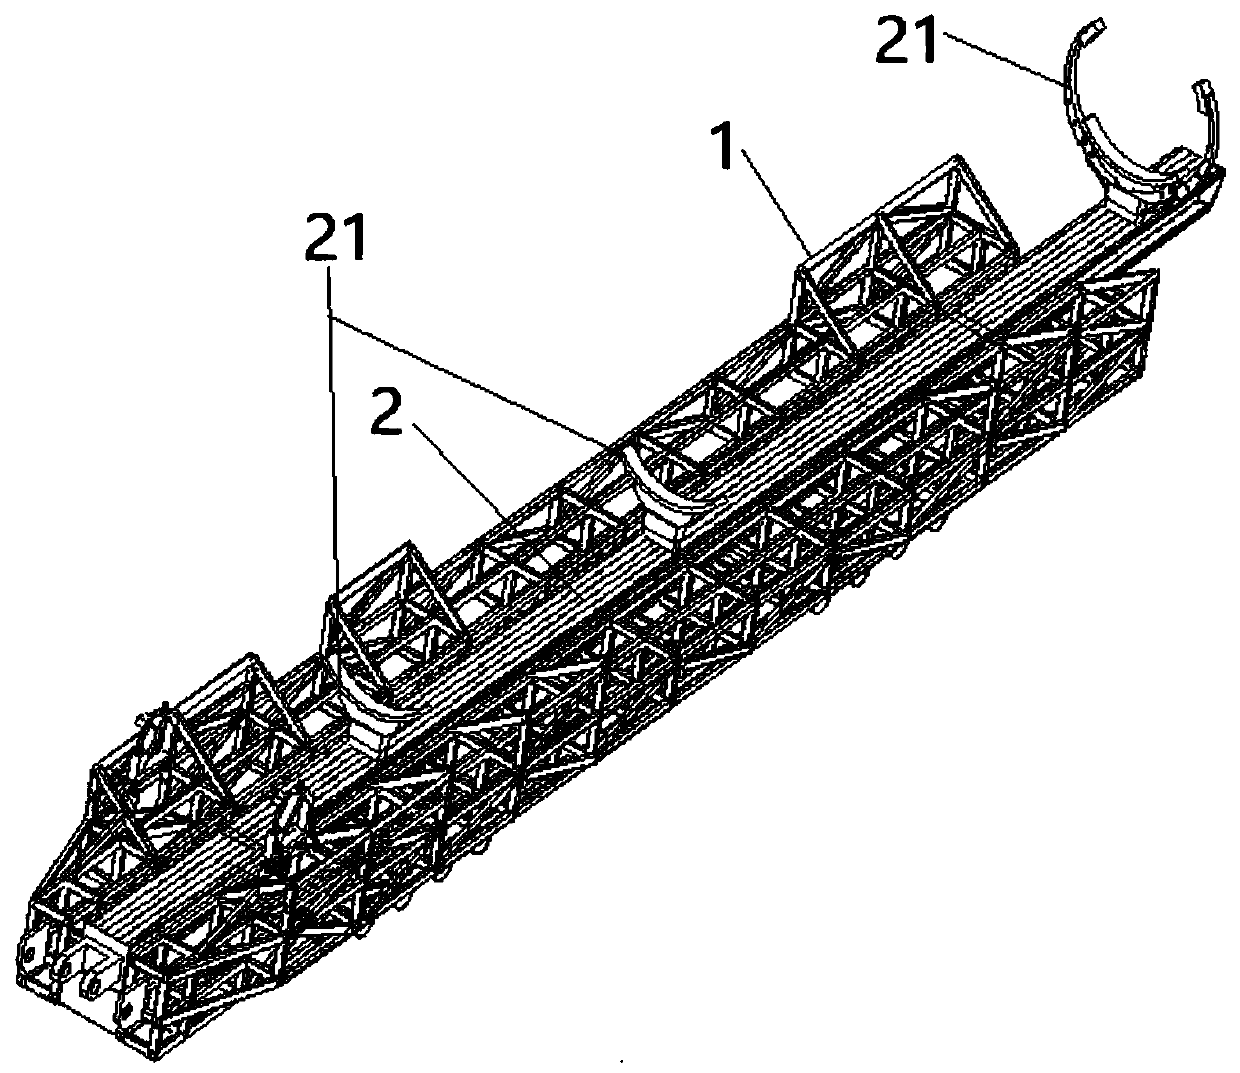 Erecting device for rocket launching and rocket launching auxiliary system